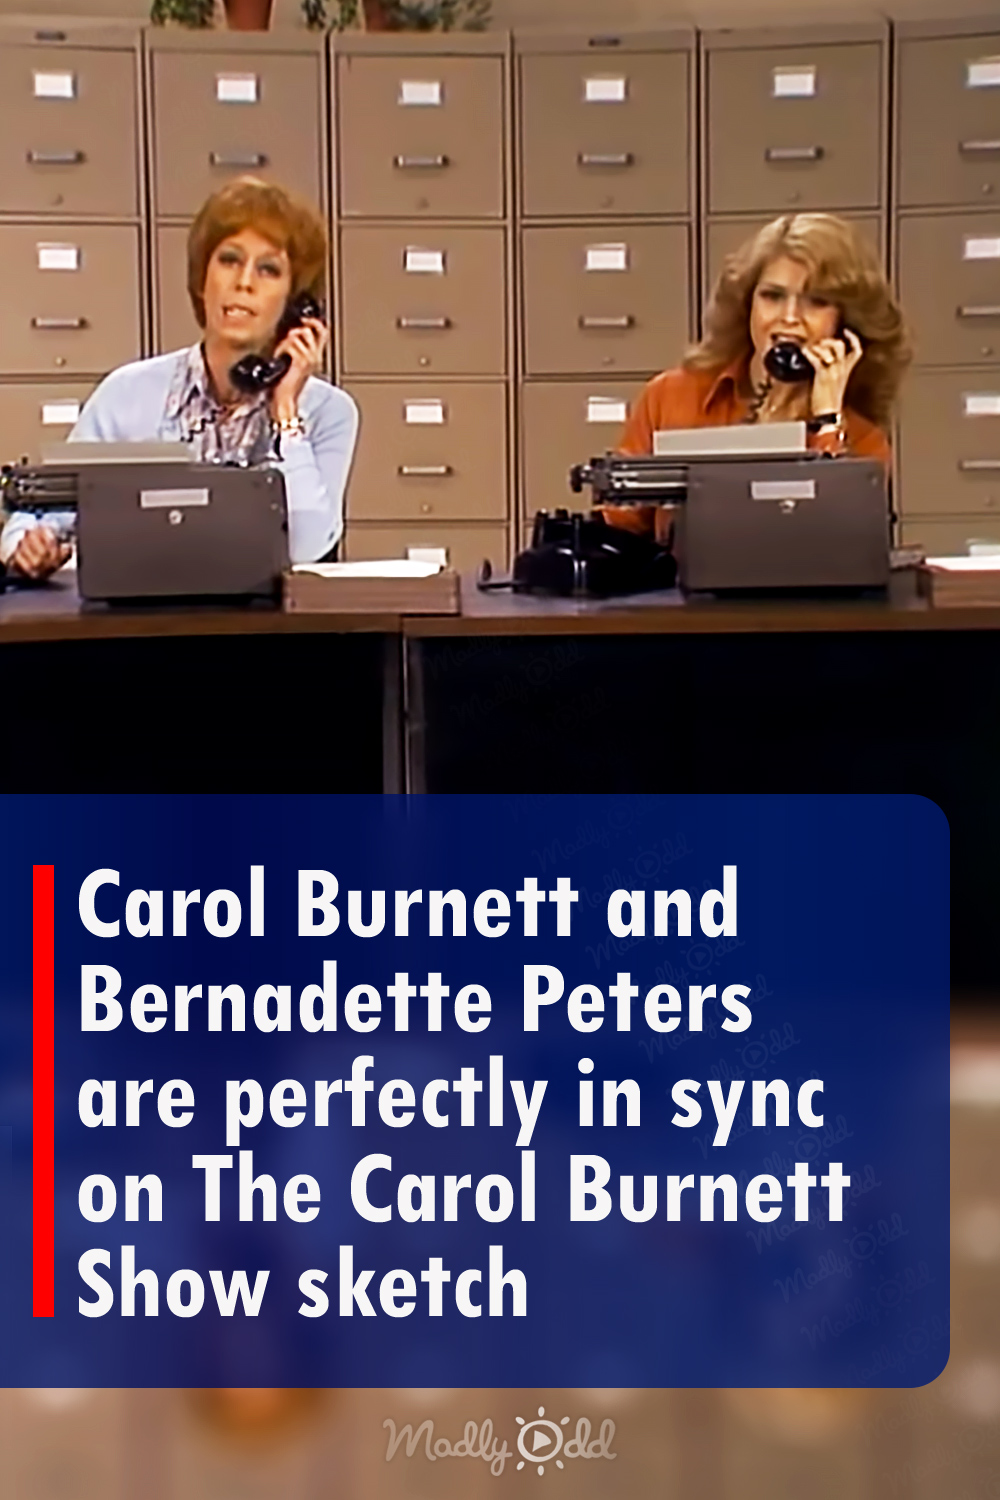 Carol Burnett and Bernadette Peters are perfectly in sync on The Carol Burnett Show sketch